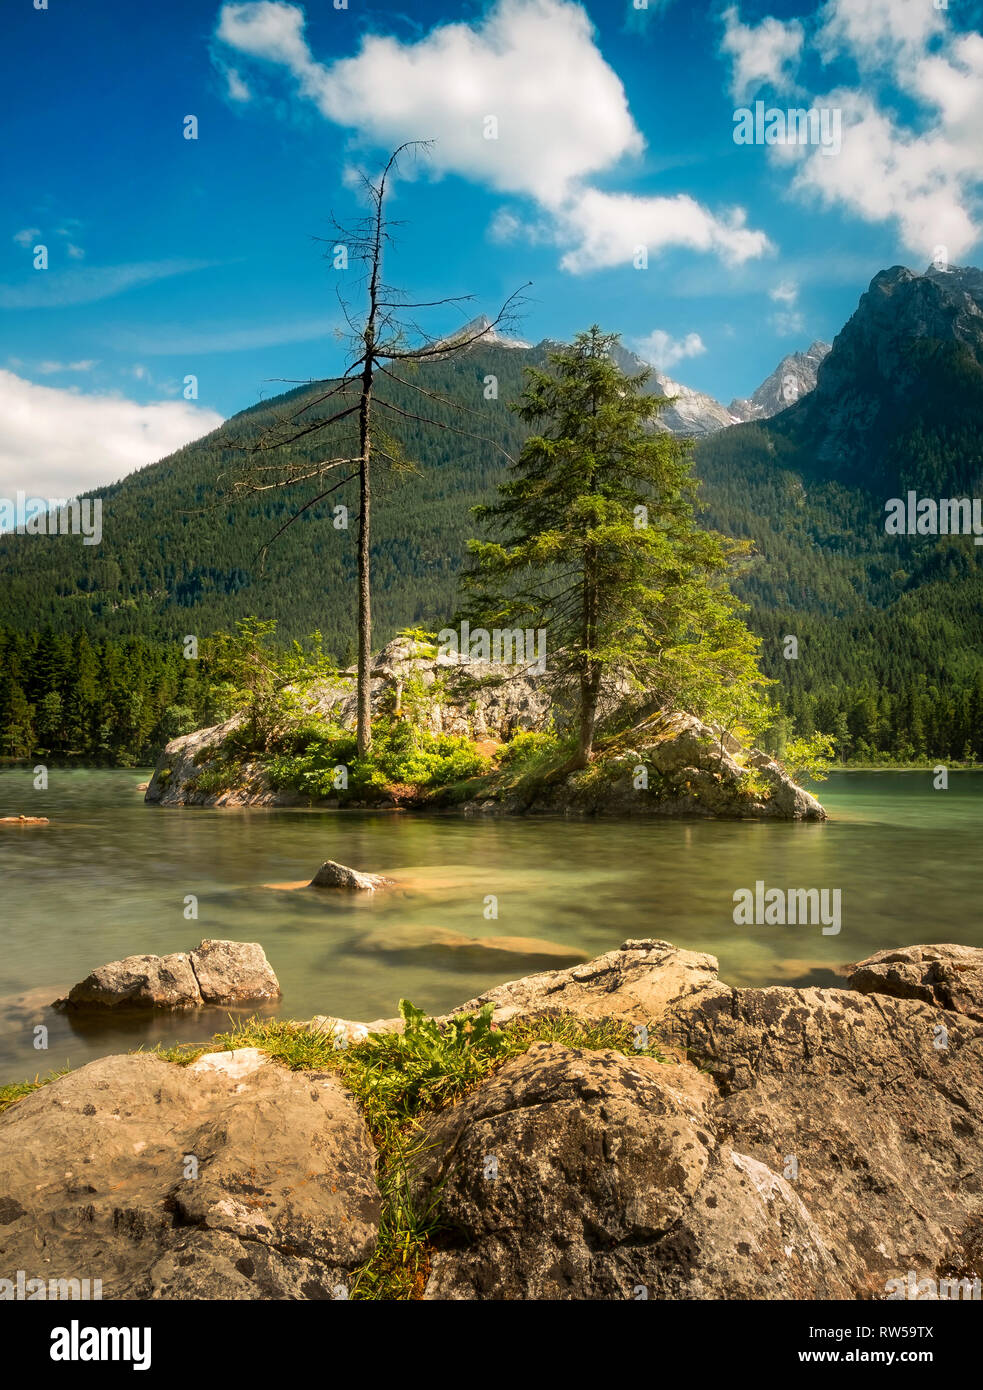 relaxing at mystic mountain lake with trees on rocks inside green water. Hintersee, Ramsau Berchtesgaden Bavaria Germany Stock Photo